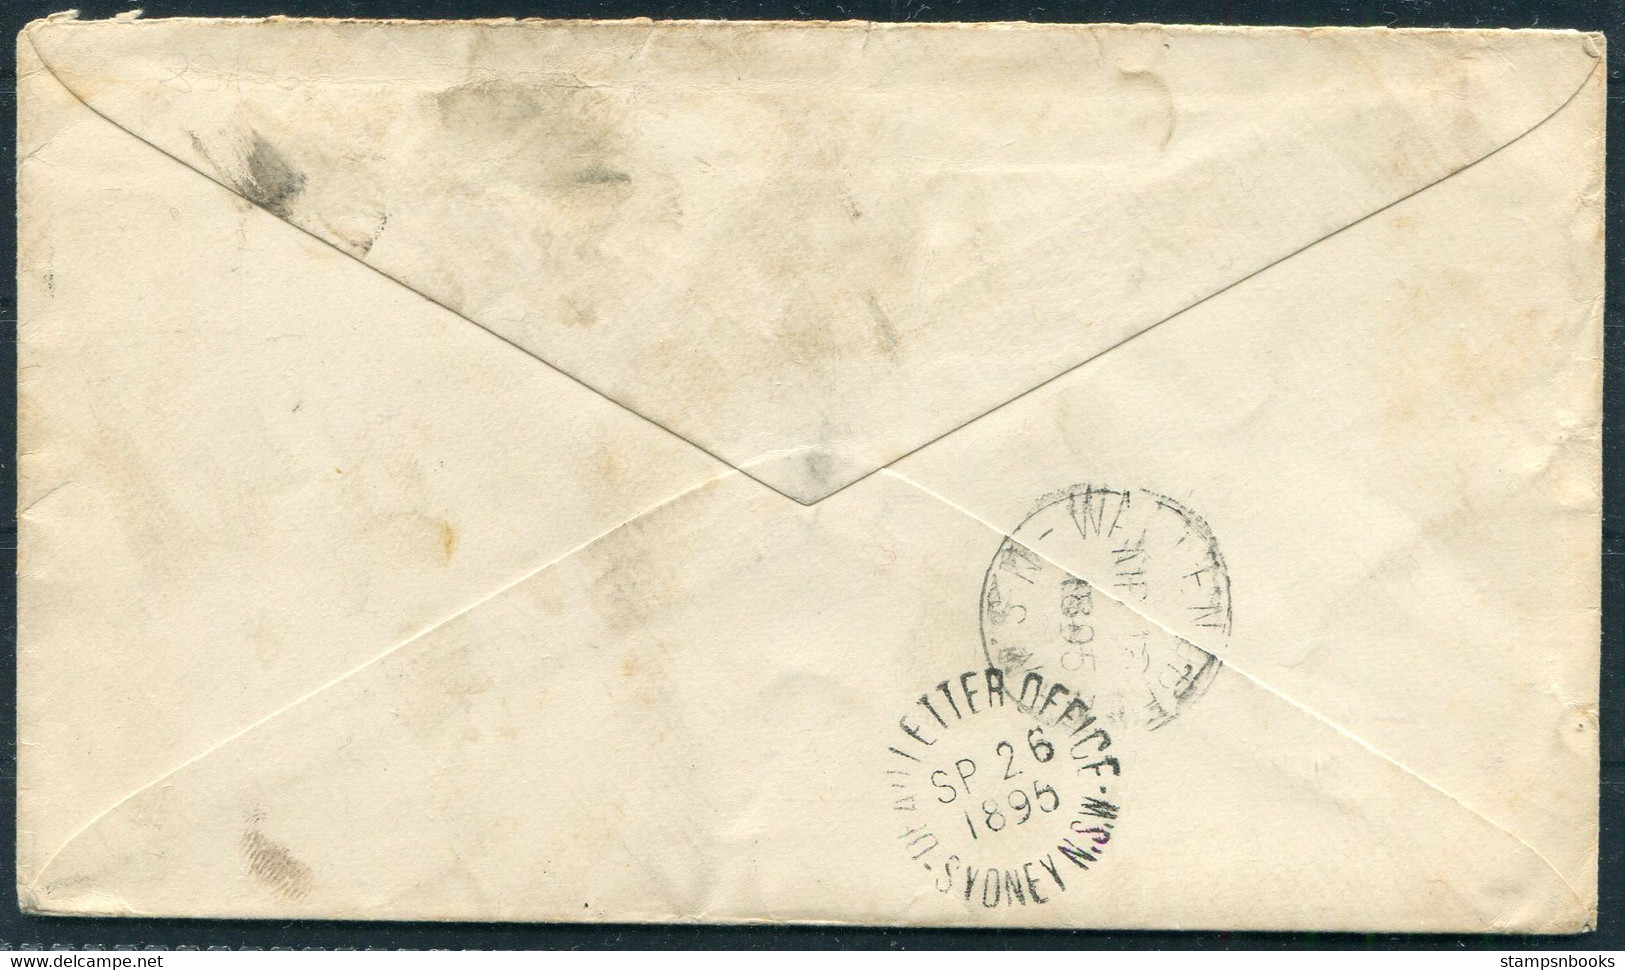 1895 Australia, New South Wales Stationery Cover Sydney - Wallendbeen "UNCLAIMED" Dead Letter Office D.L.O. - Lettres & Documents